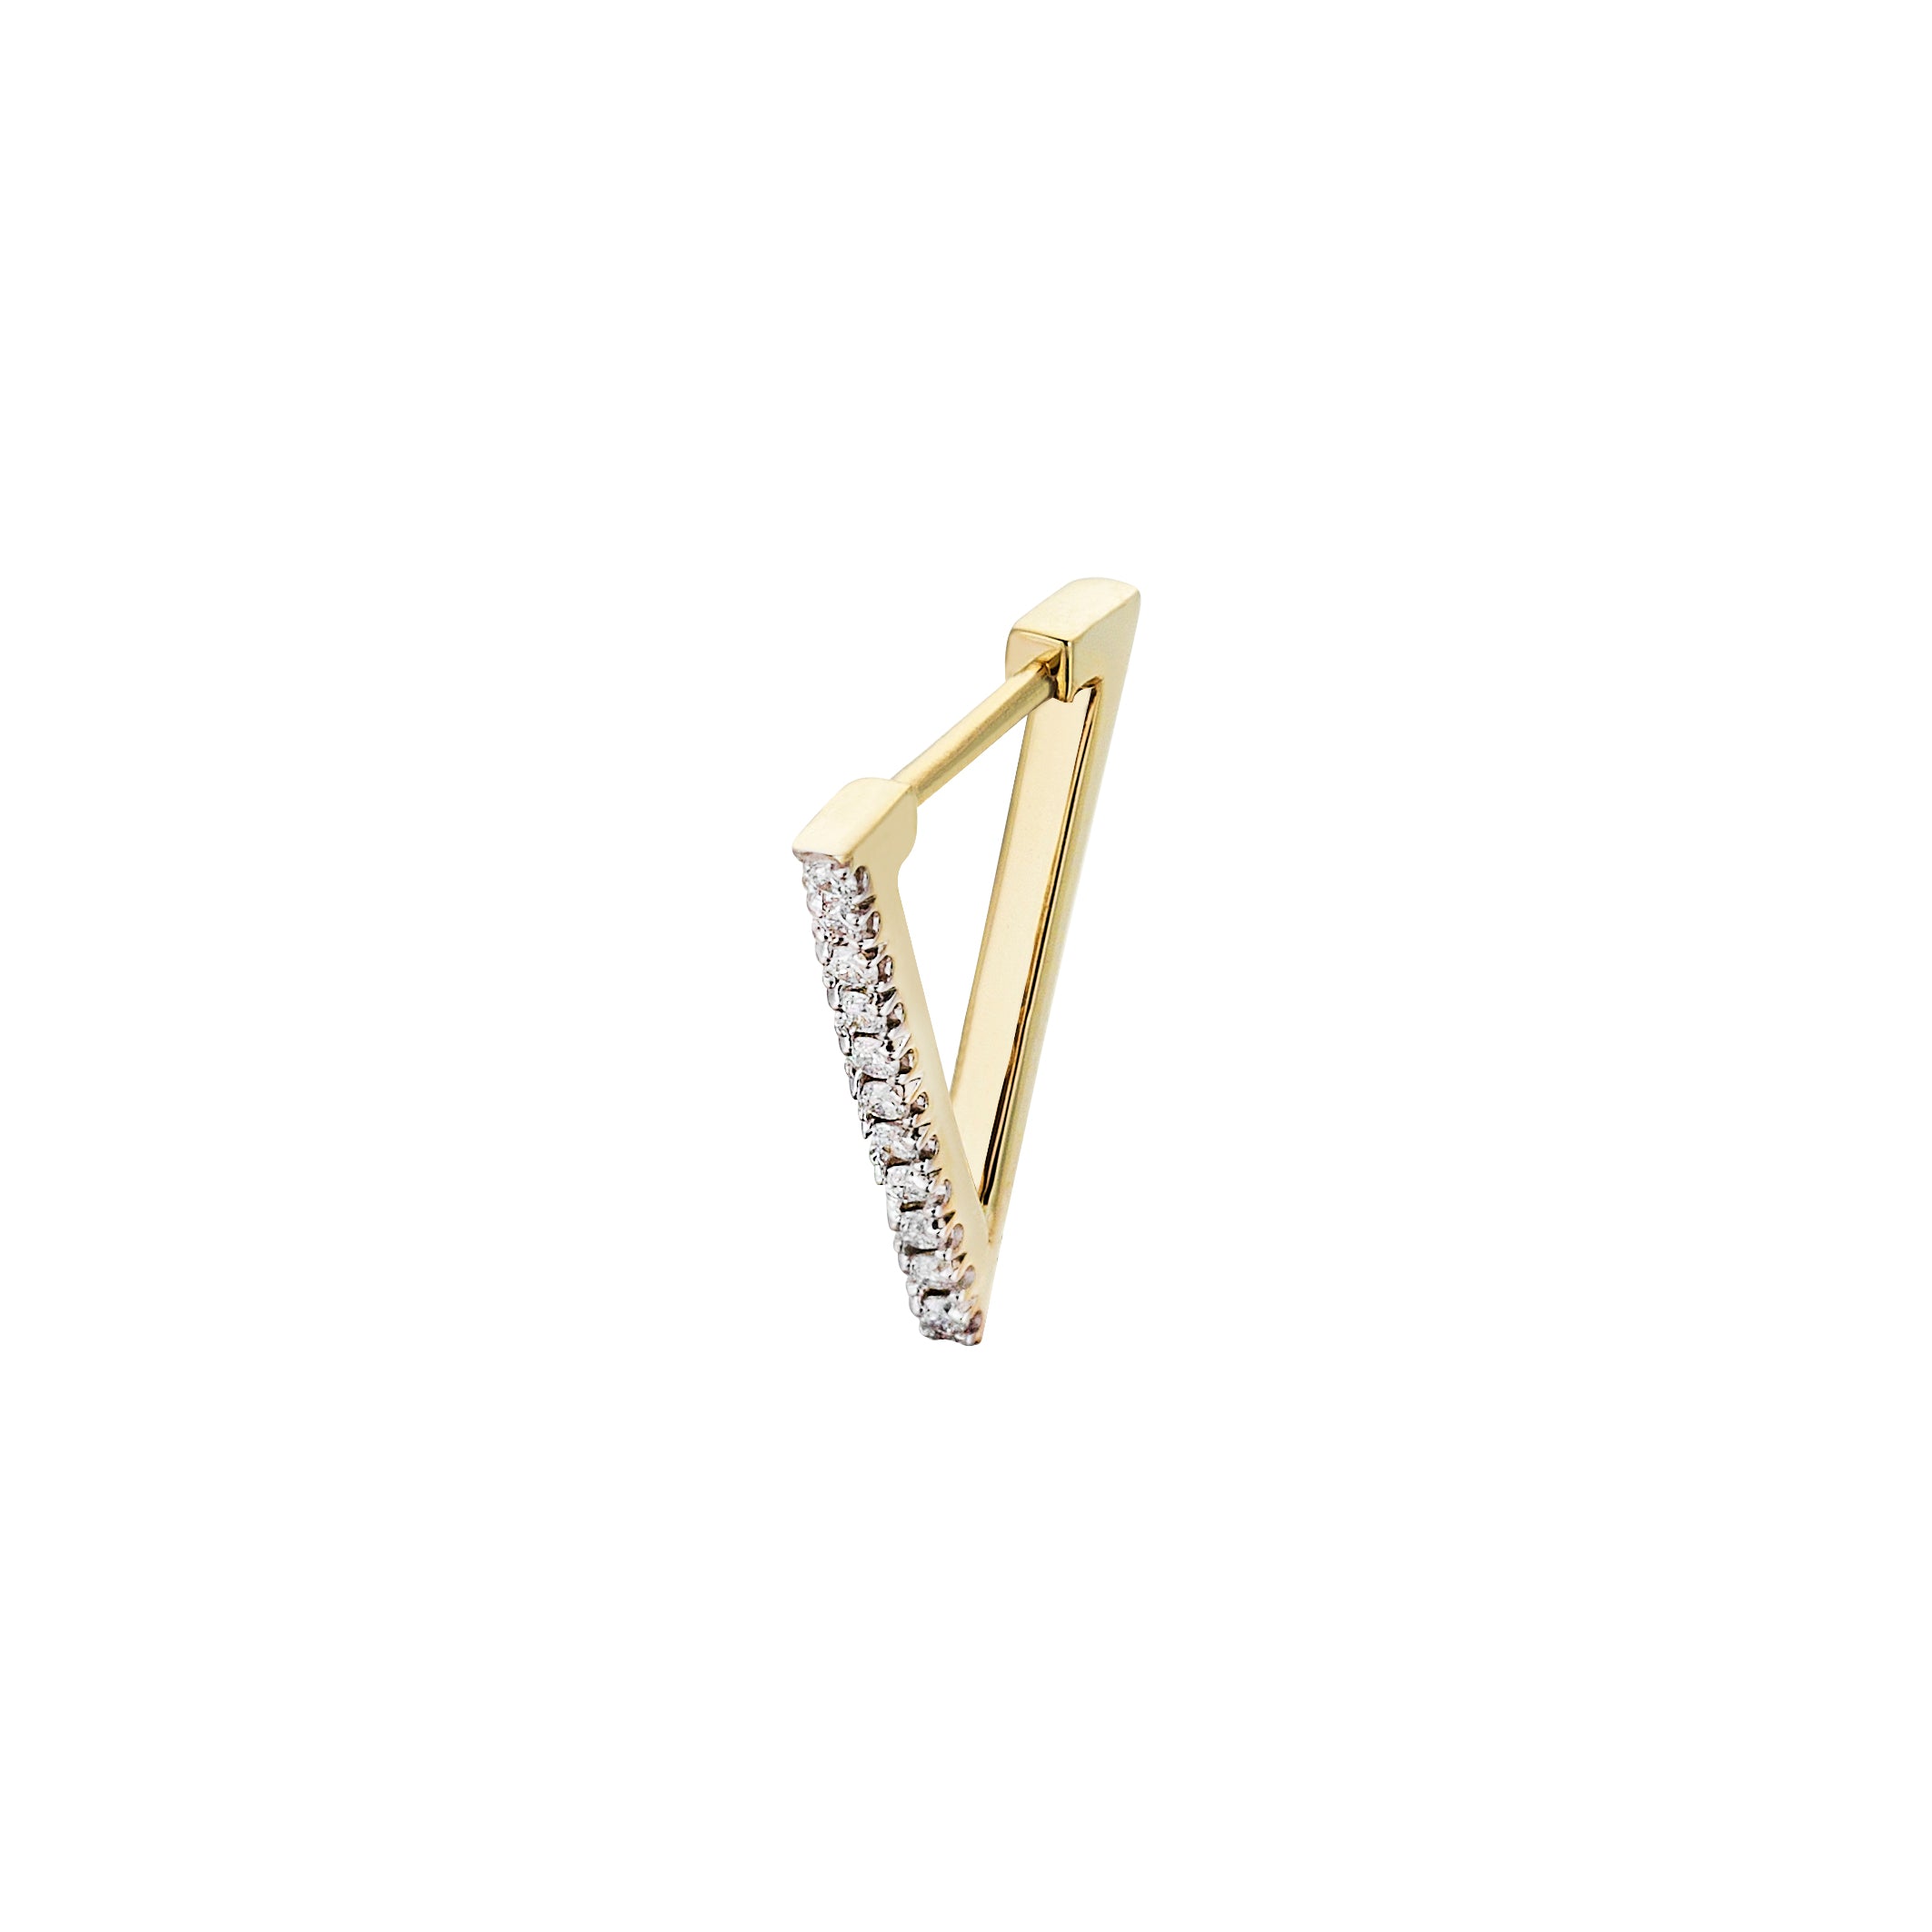 Mini Triangle Earring in Yellow Gold - Her Story Shop